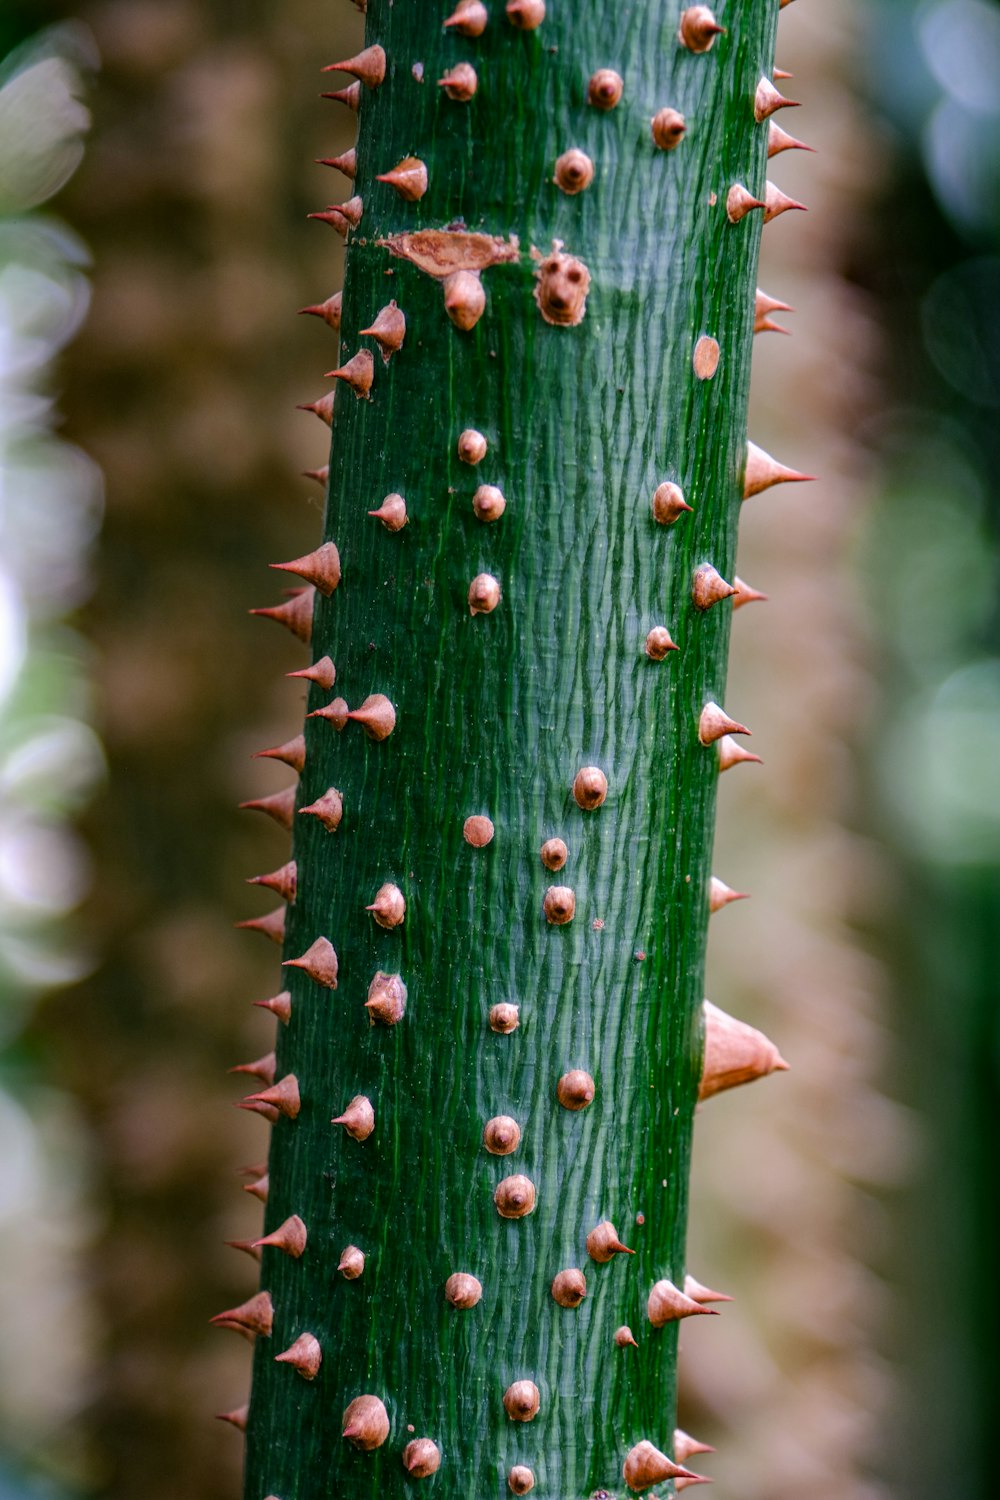 a close up of a green plant with spikes